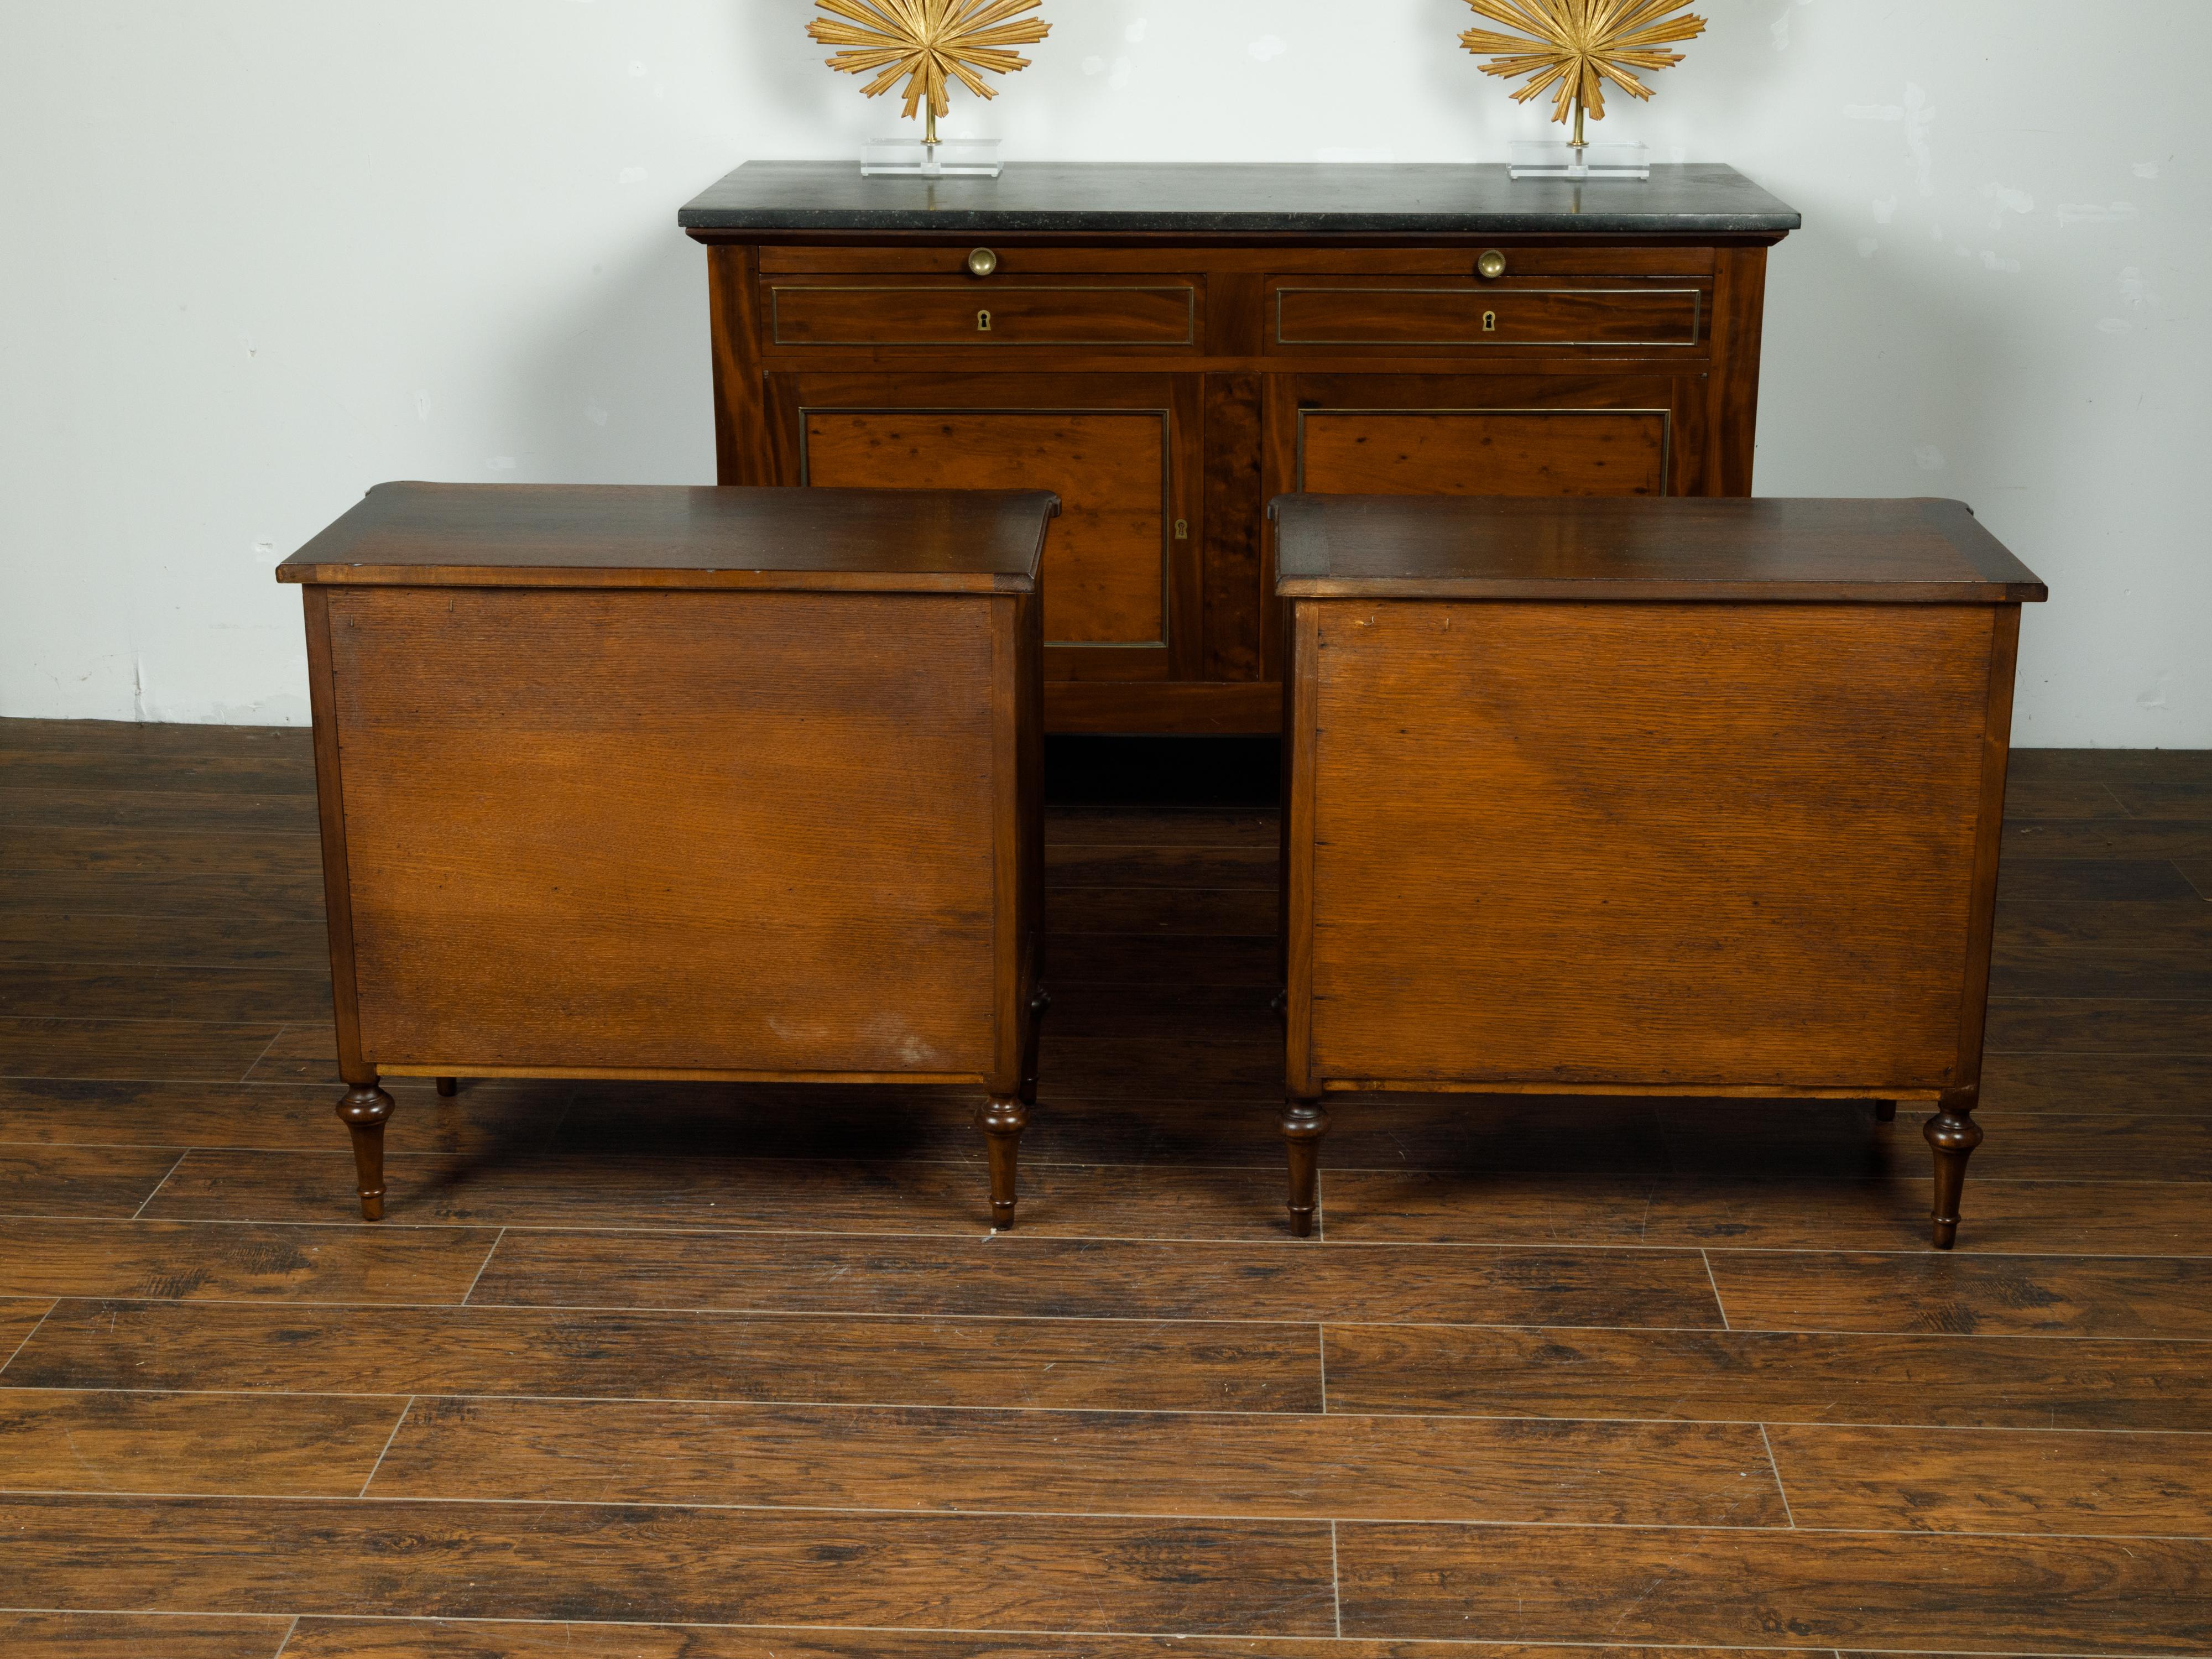 20th Century Pair of English Vintage Mahogany Commodes with Four Drawers and Brass Hardware